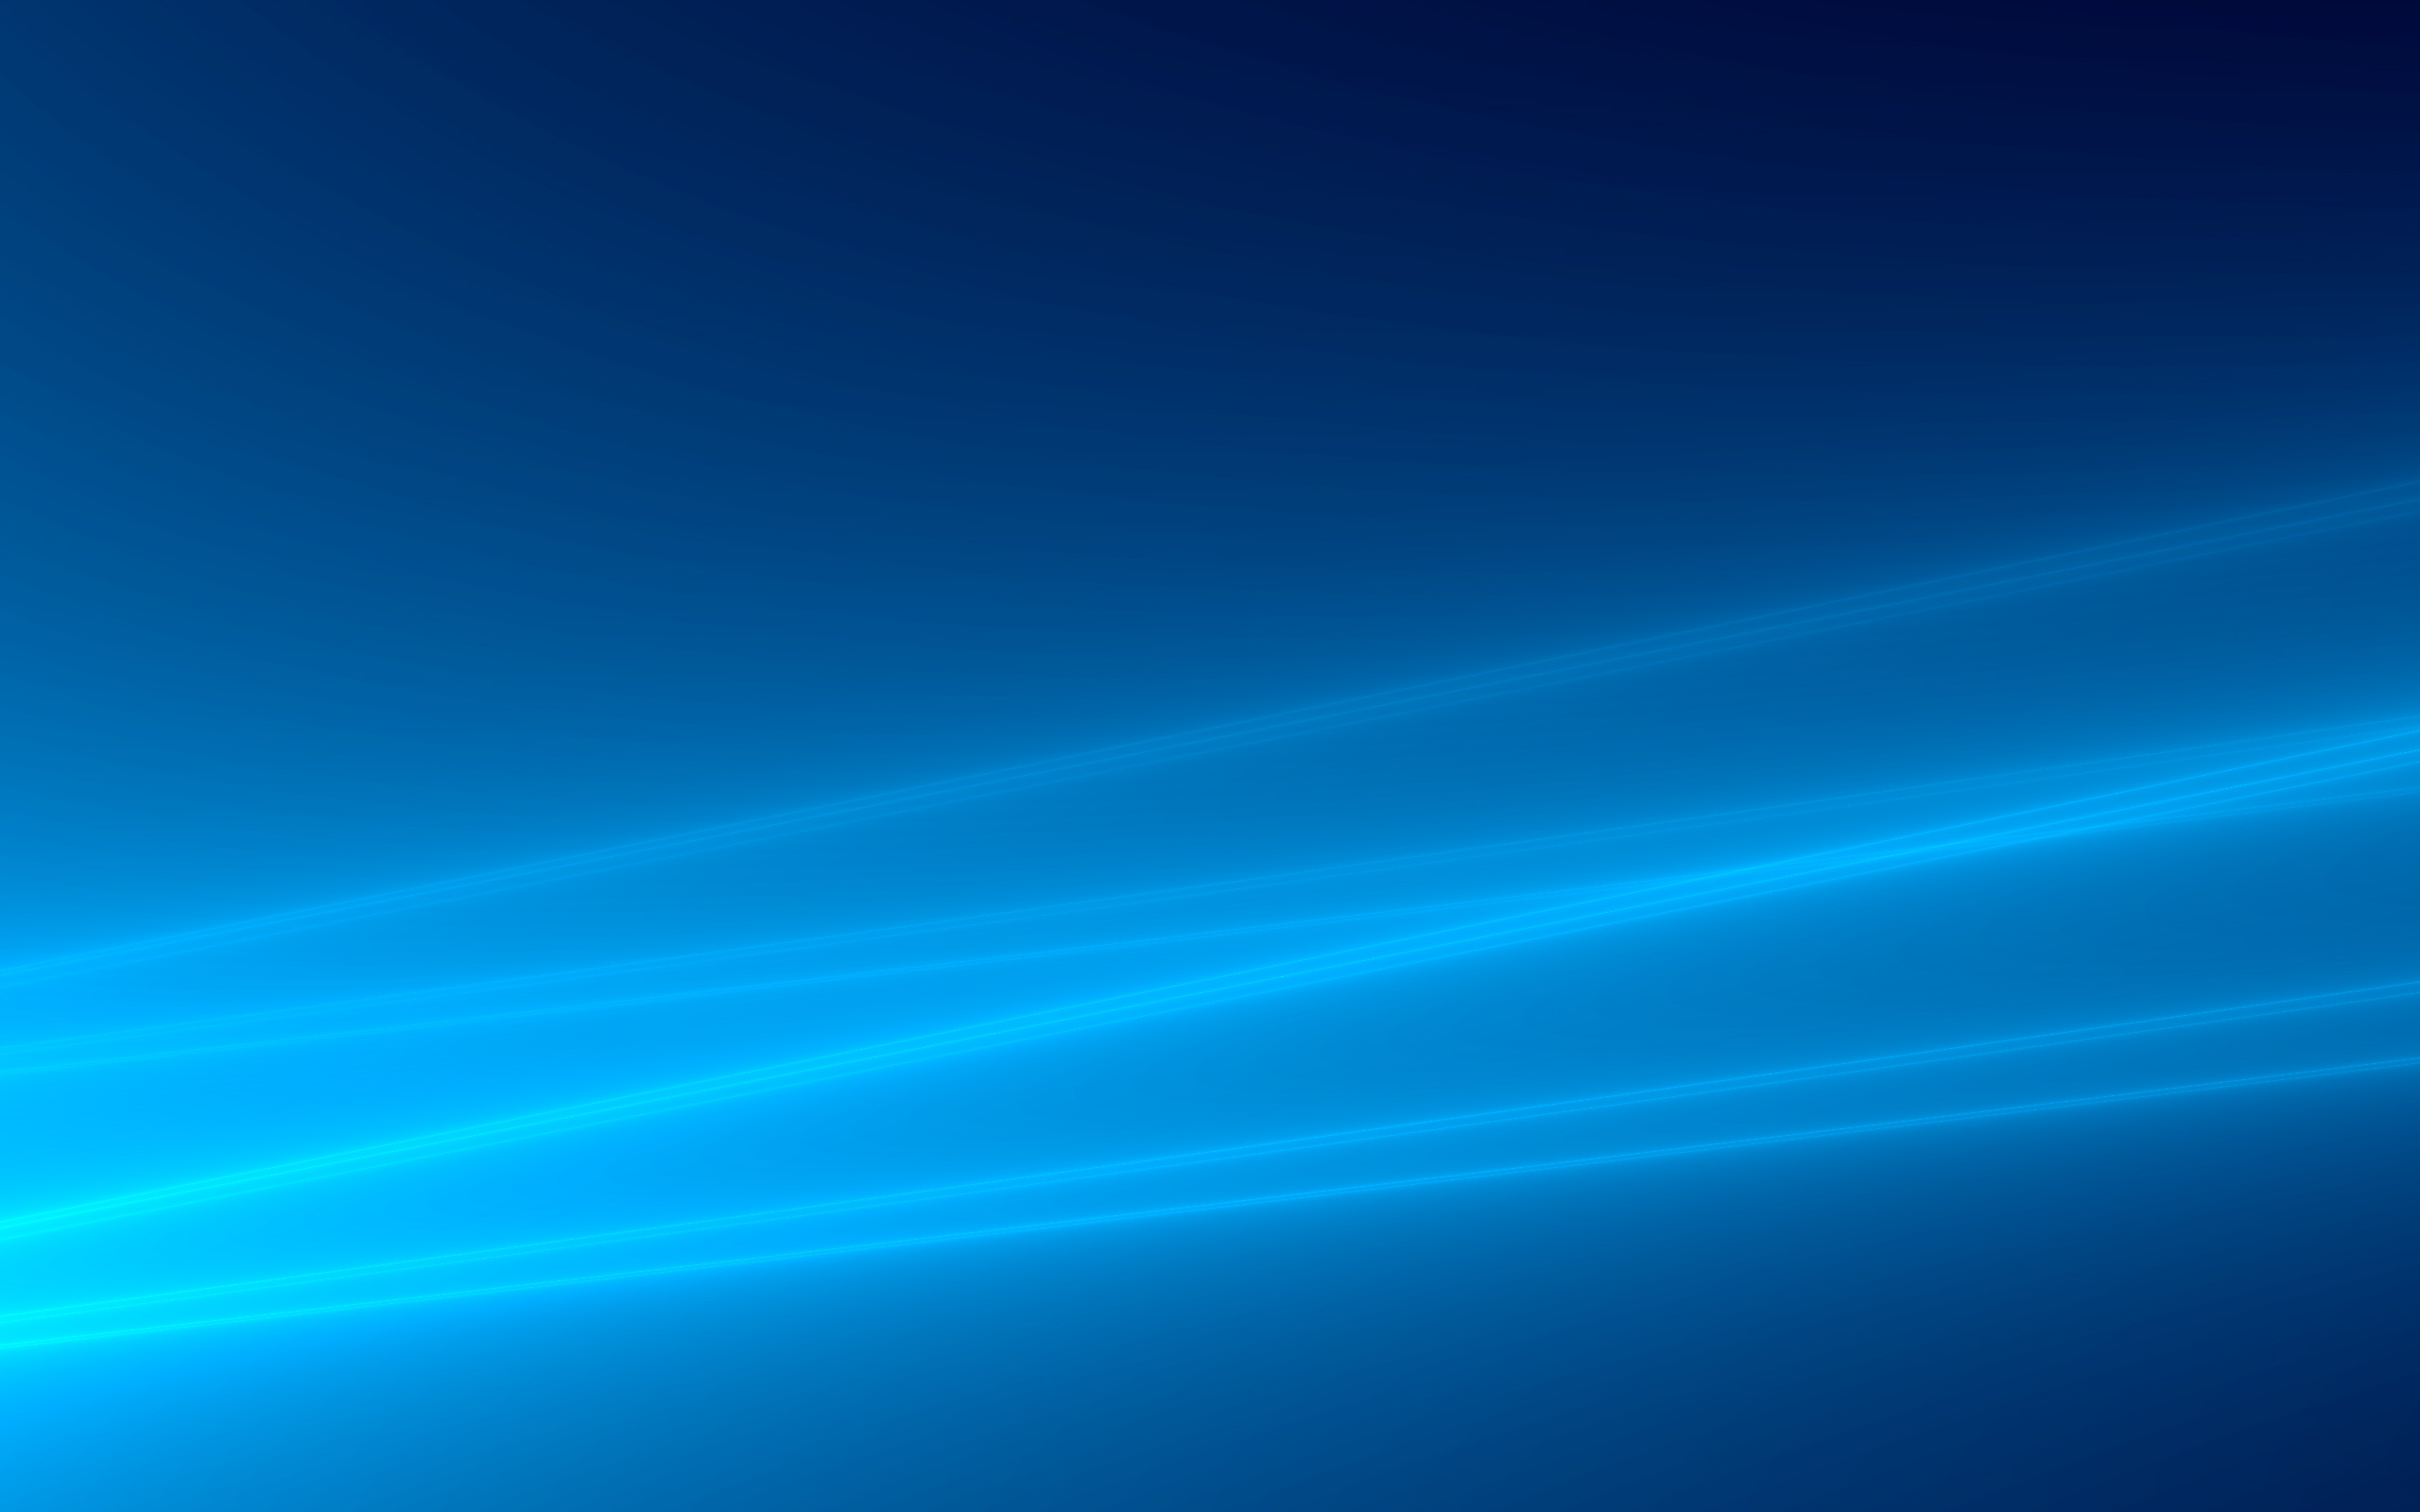 69 4K Blue Wallpaper Backgrounds That Will Give Your 2560x1600